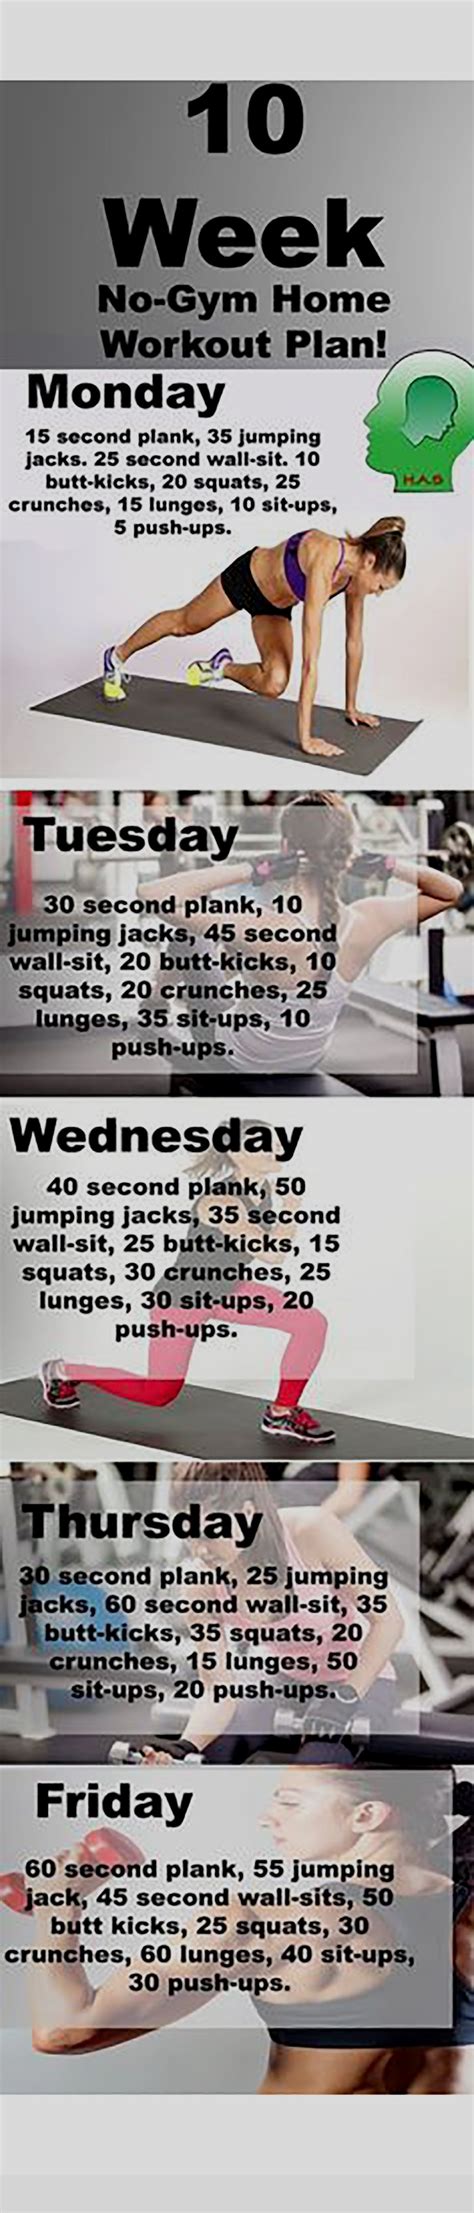 The 10 Week No Gym Home Workout Plans In 2020 At Home Workout Plan